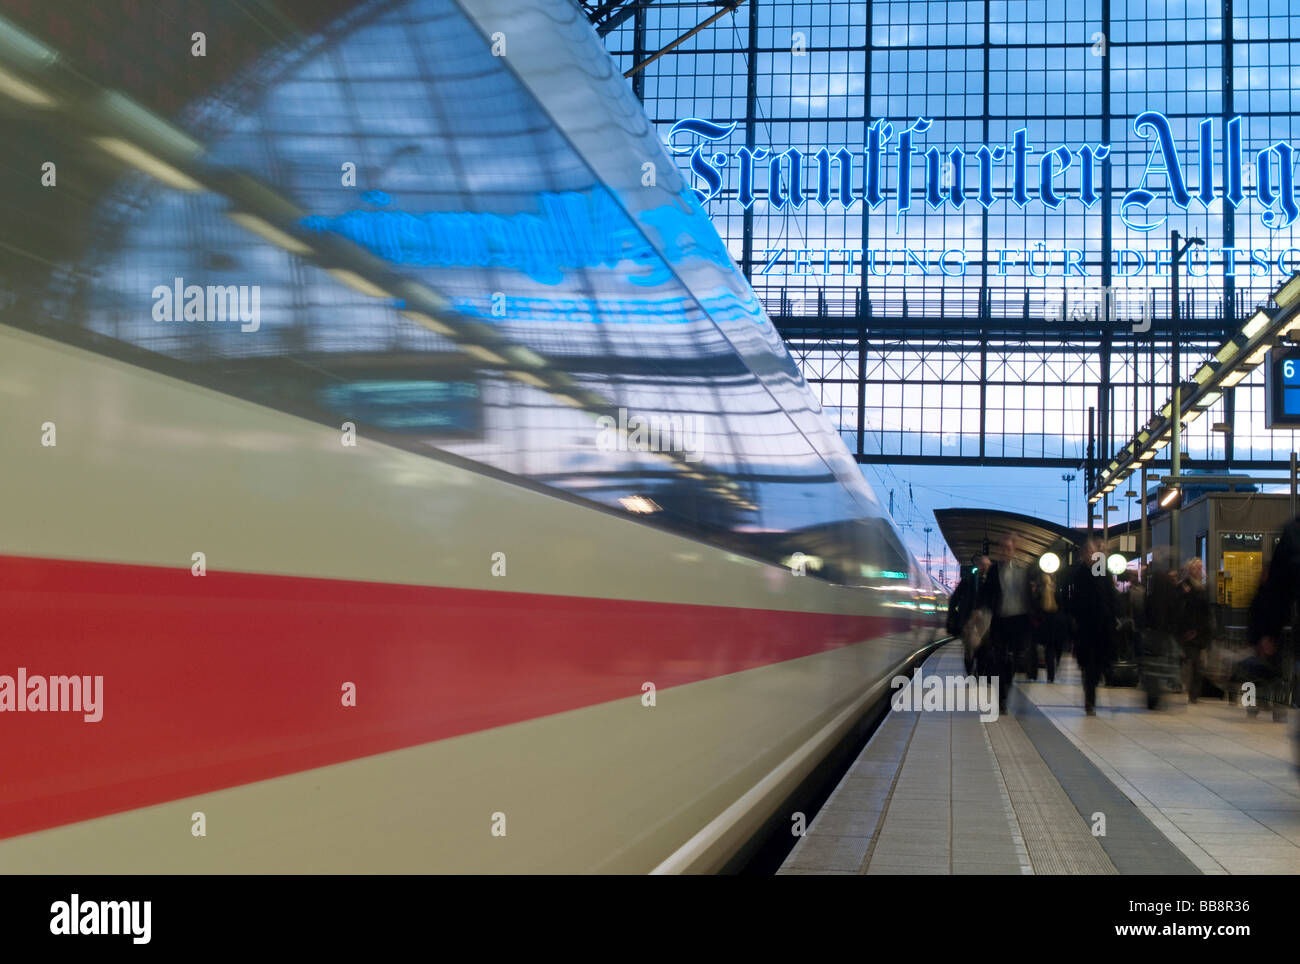 One of the German Federal Railways ICE leaves the Central Station, passengers along side the train, Frankfurt Hauptbahnhof, Fra Stock Photo